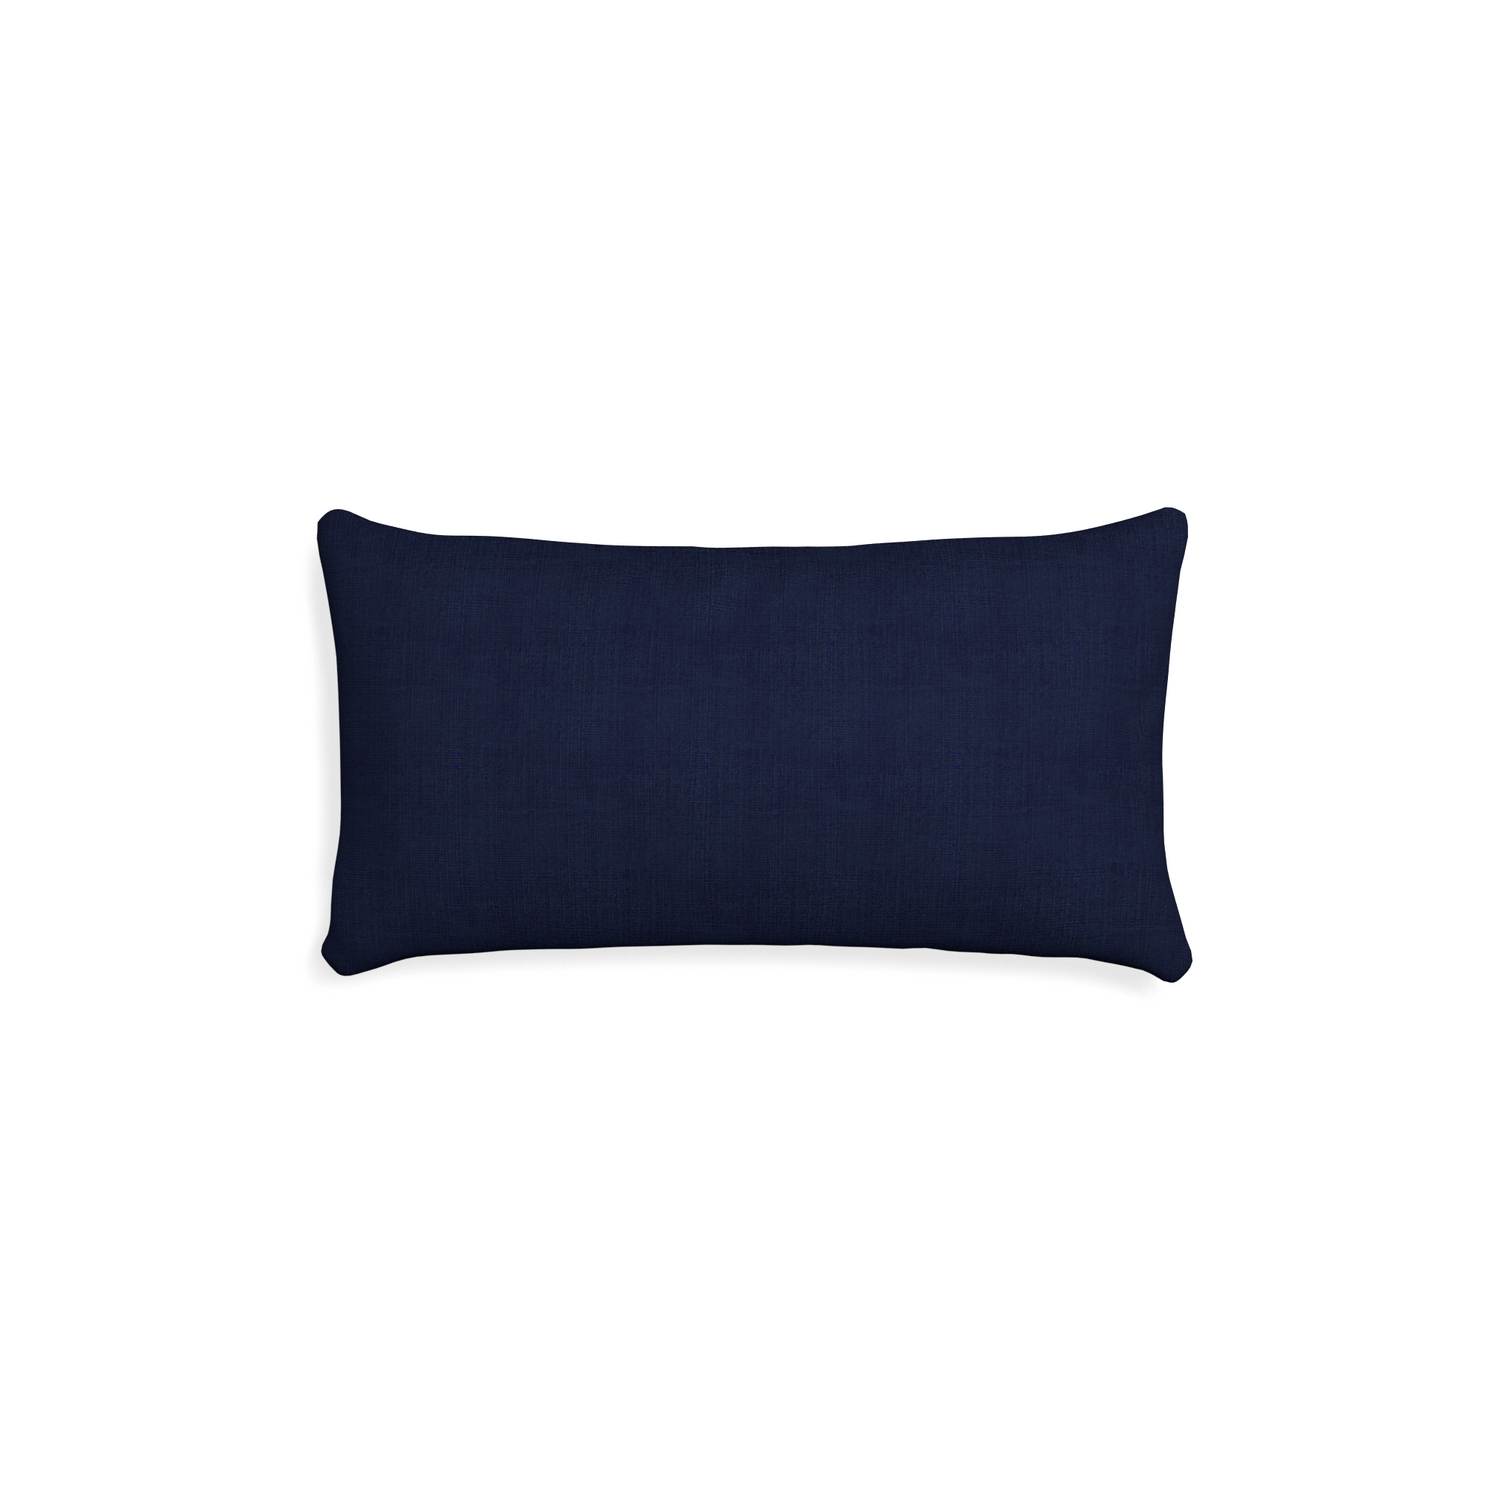 Petite-lumbar midnight custom navy bluepillow with none on white background